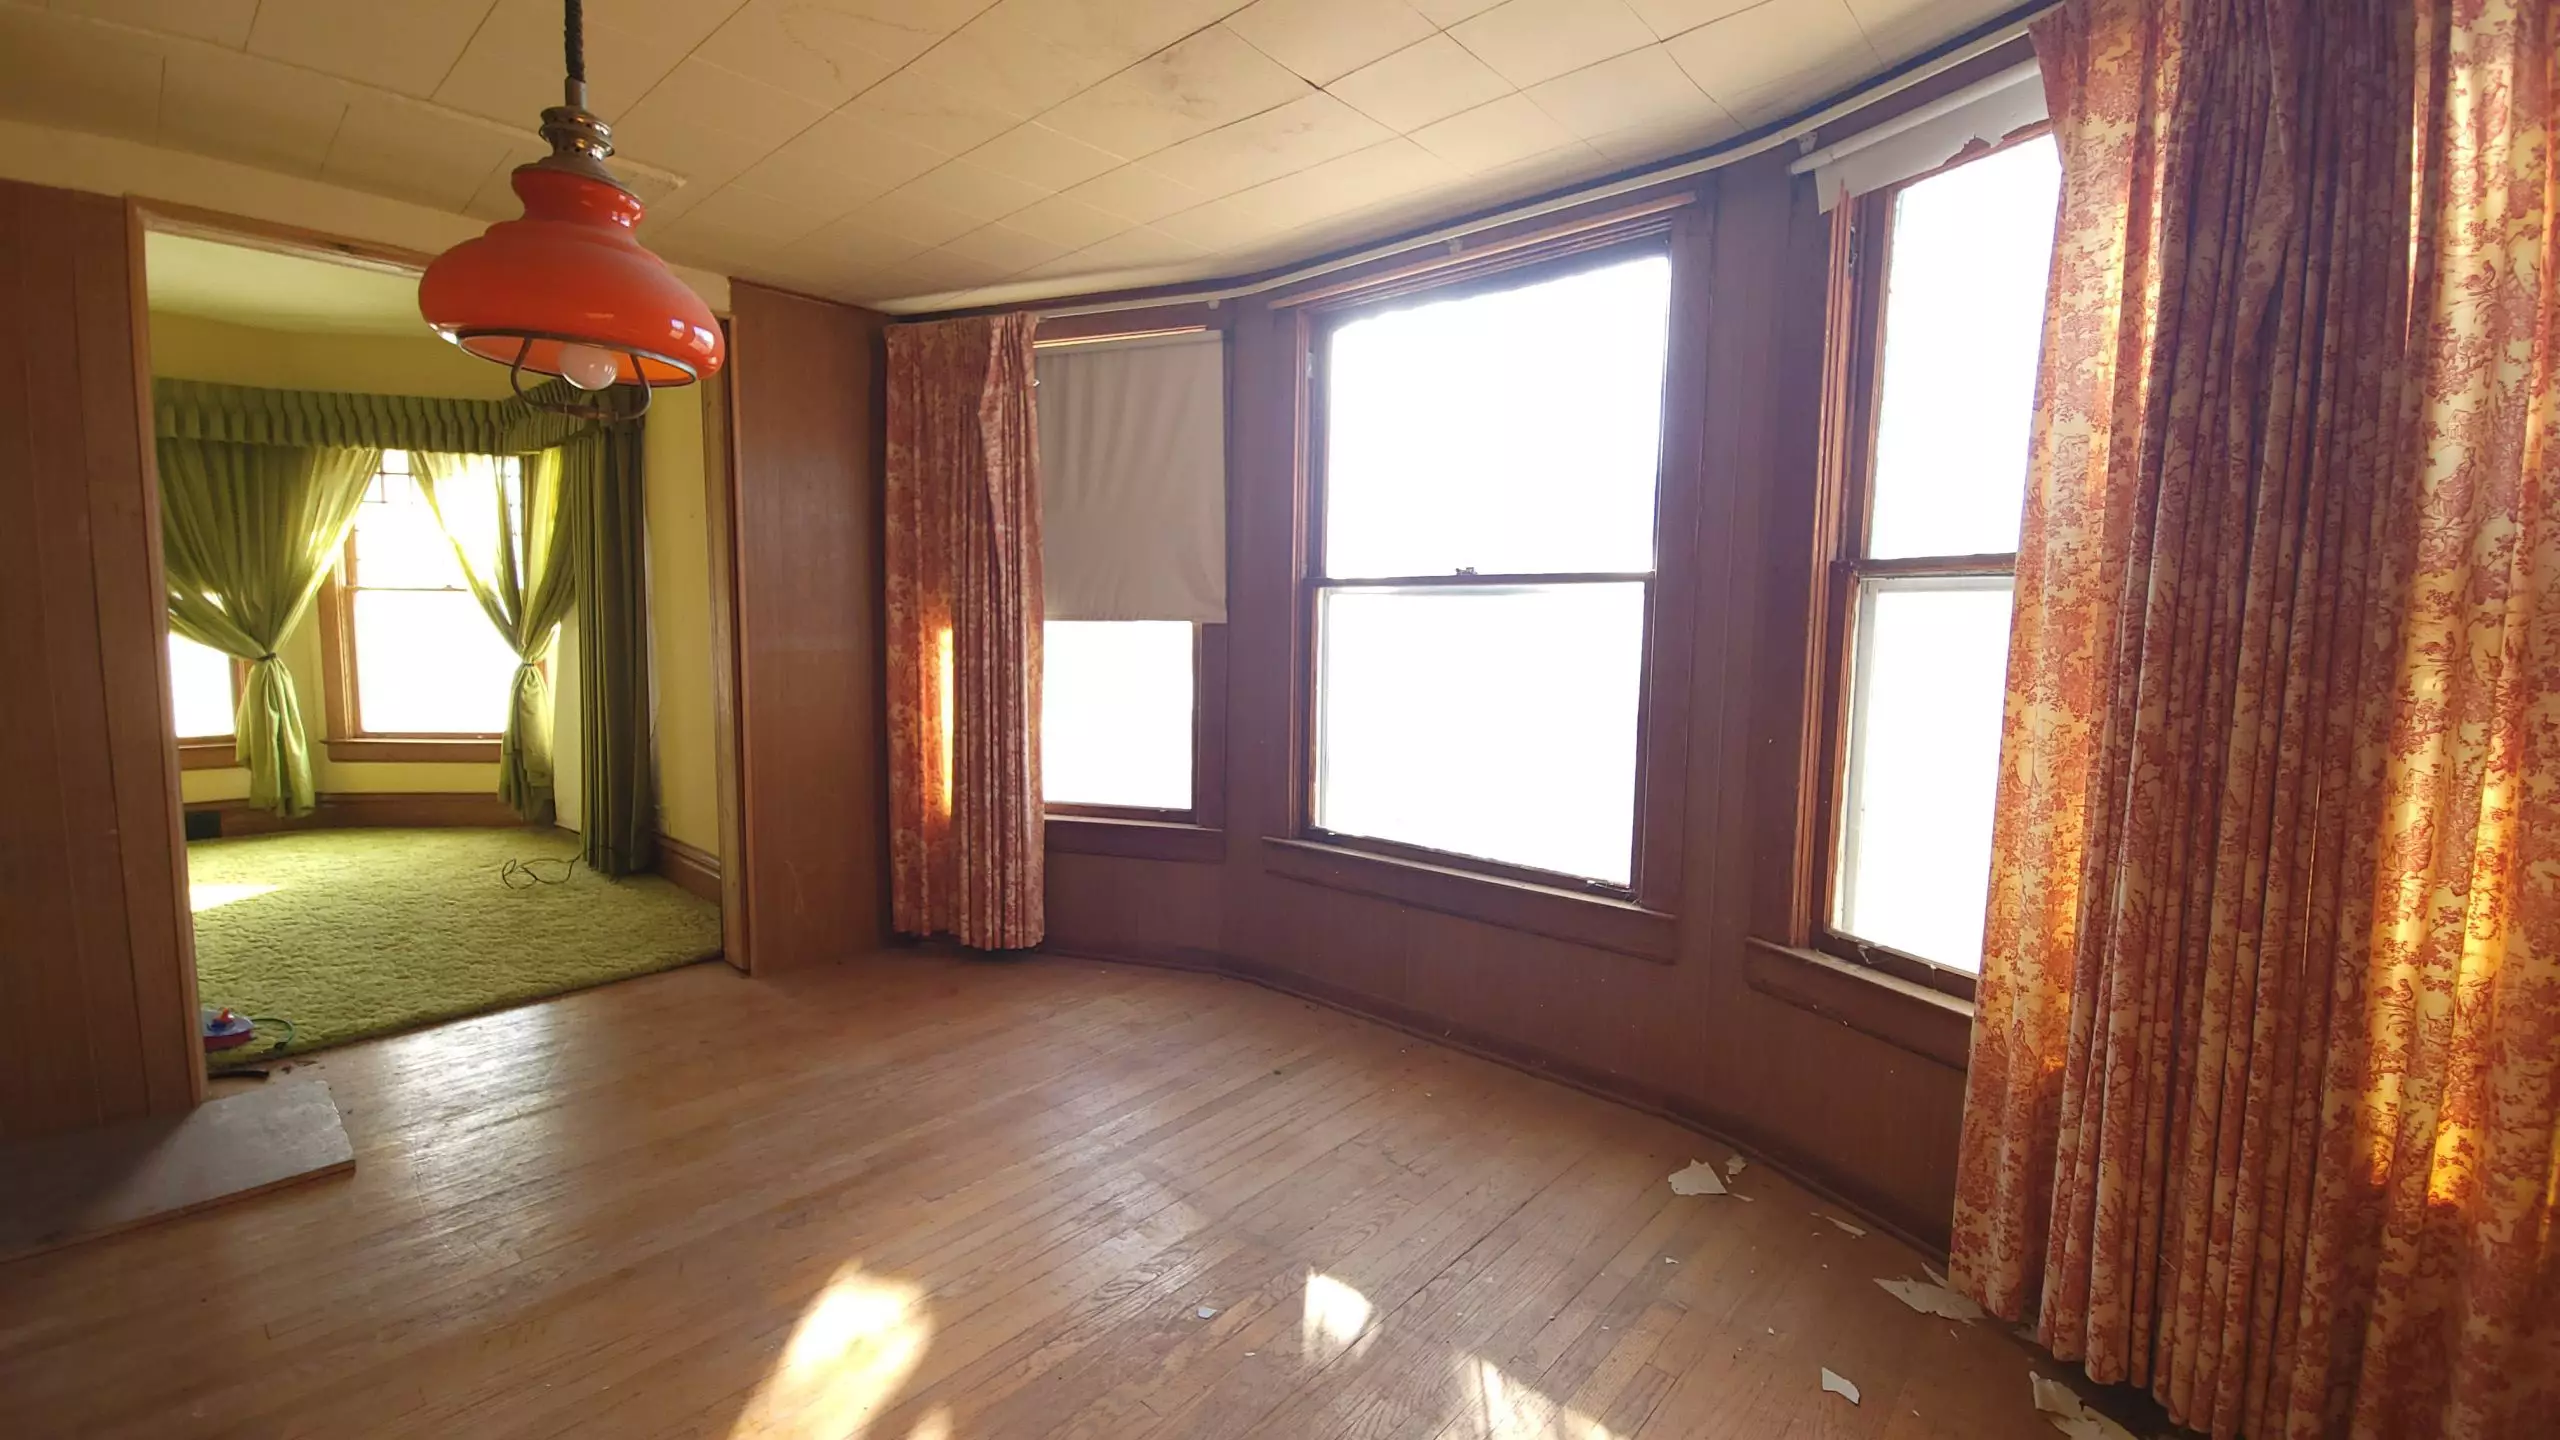 Interior of a three-bedroom historic house located in Lincoln, Kansas, which has been put on sale for free.